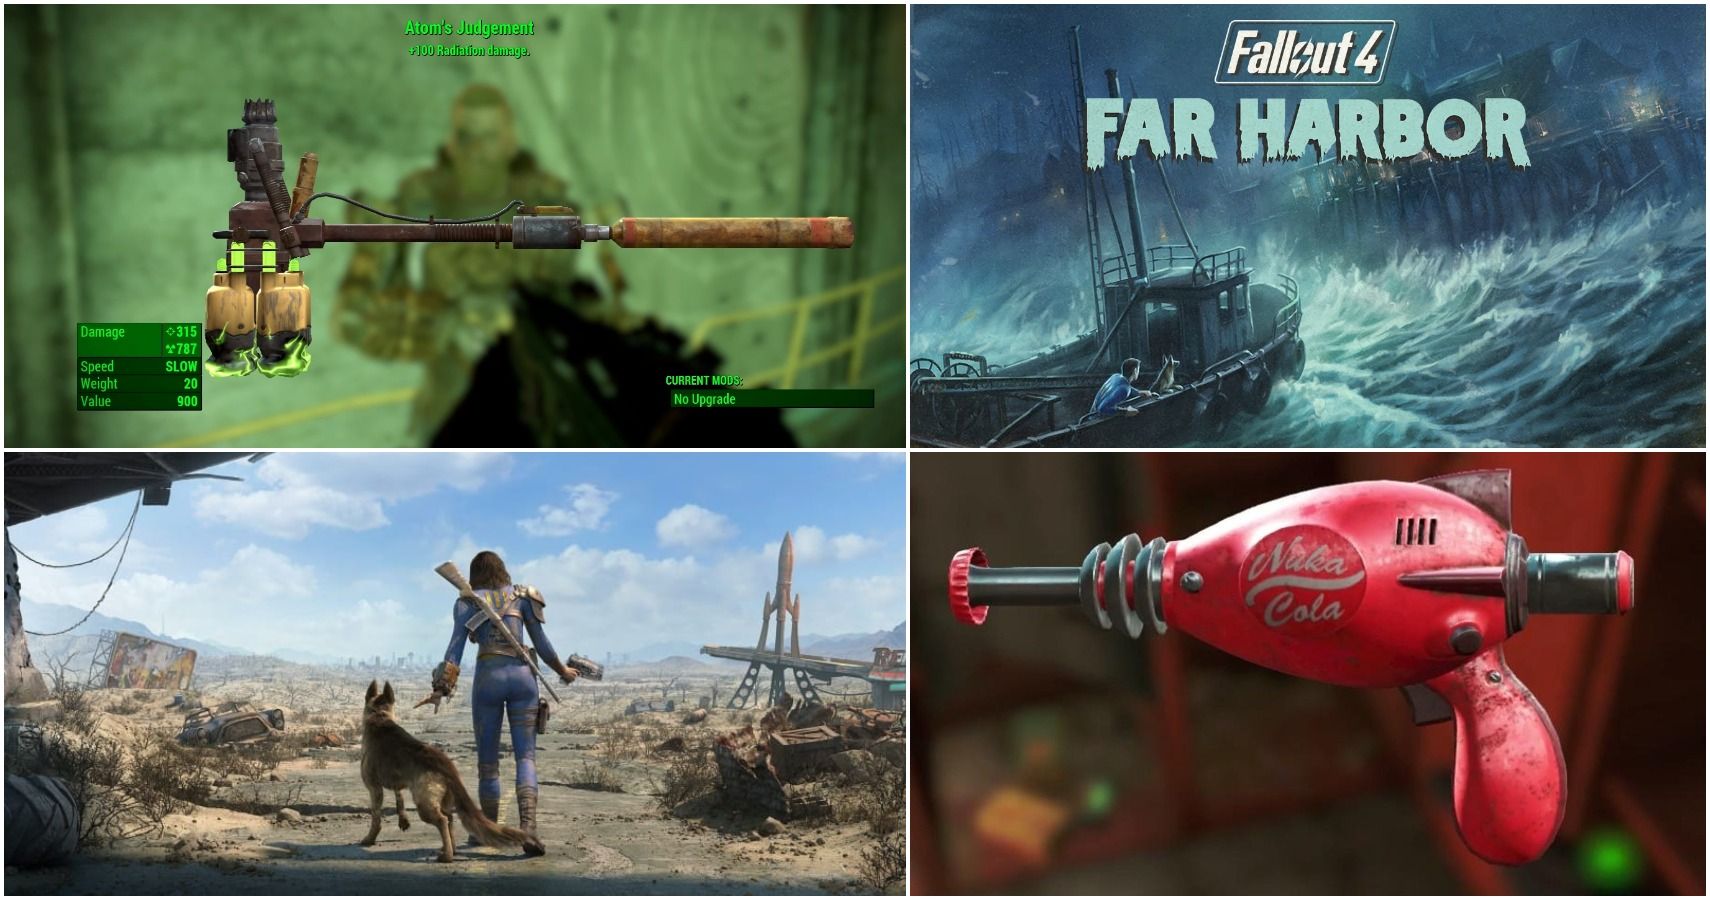 where to find fallout 4 dlc game files